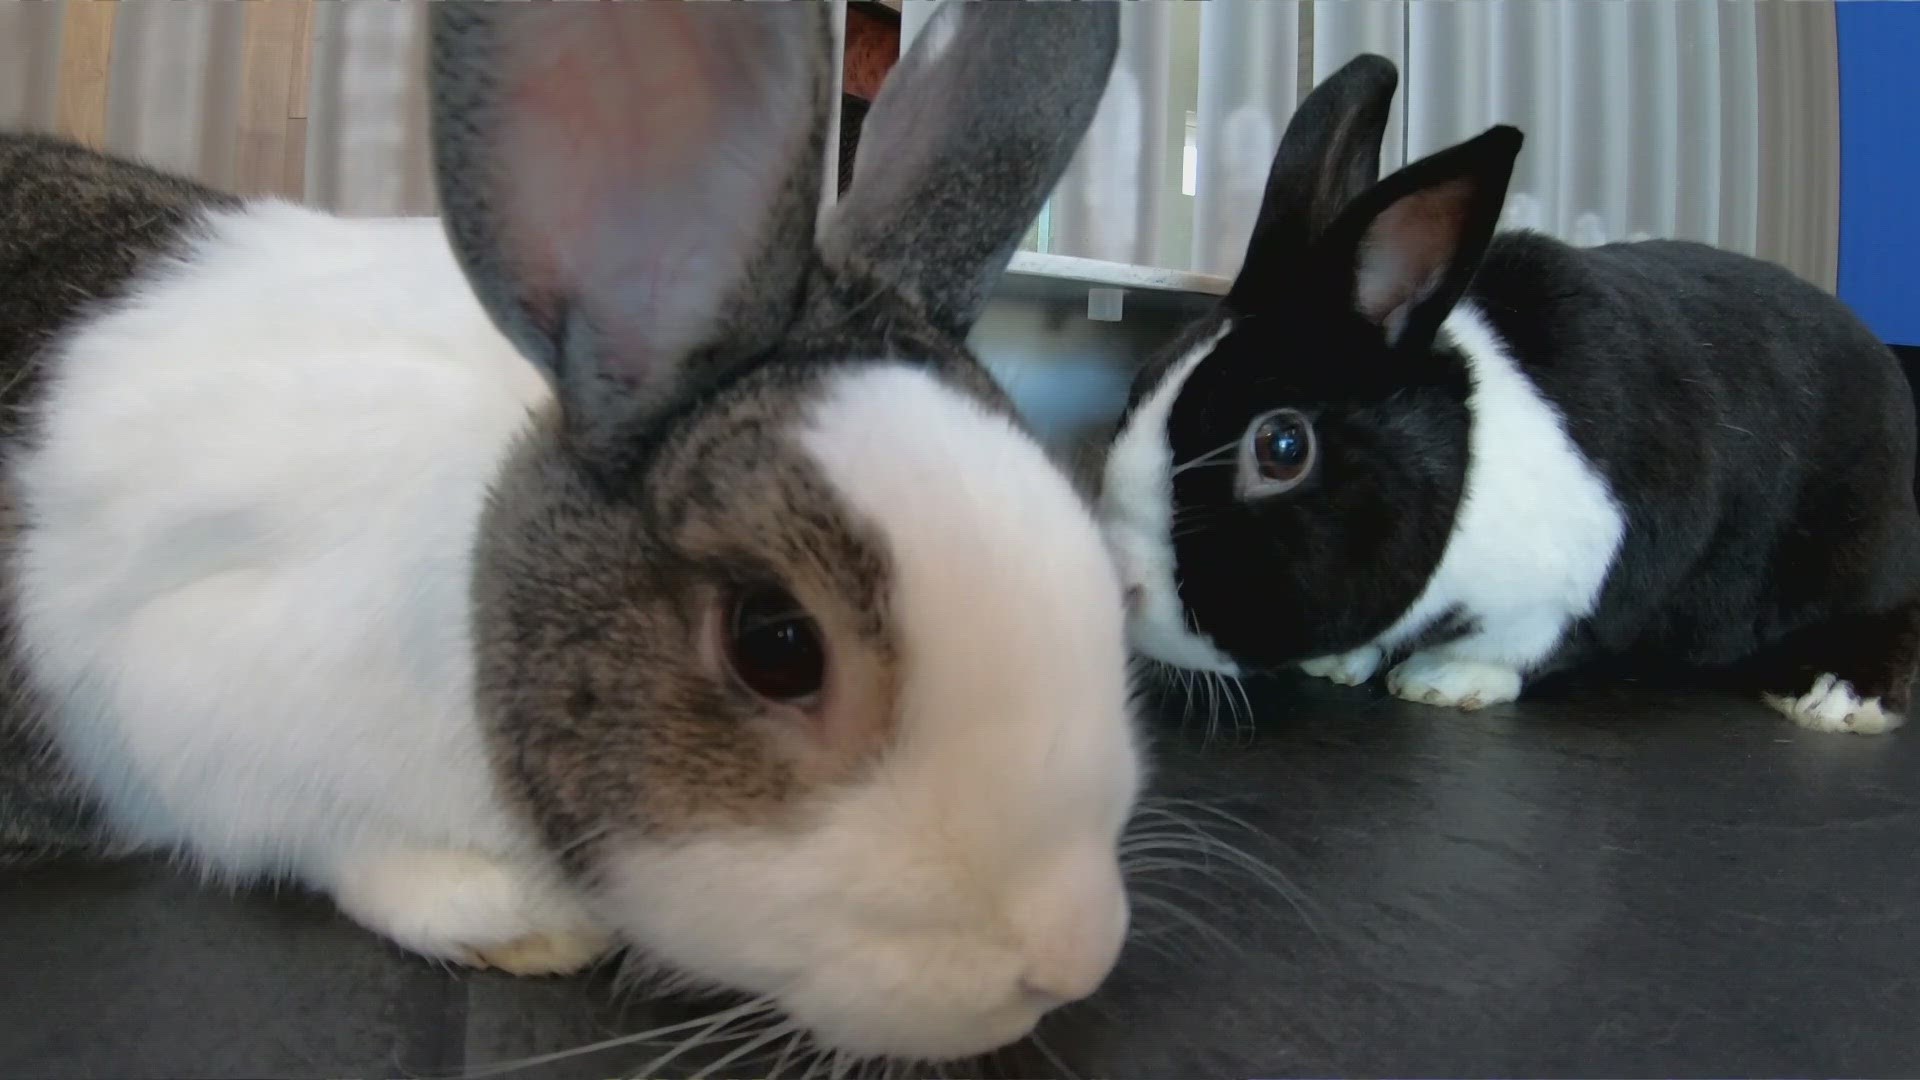 WWL Louisiana's Eleanor Tabone explains that rabbits aren't just an Easter present, they're much more.